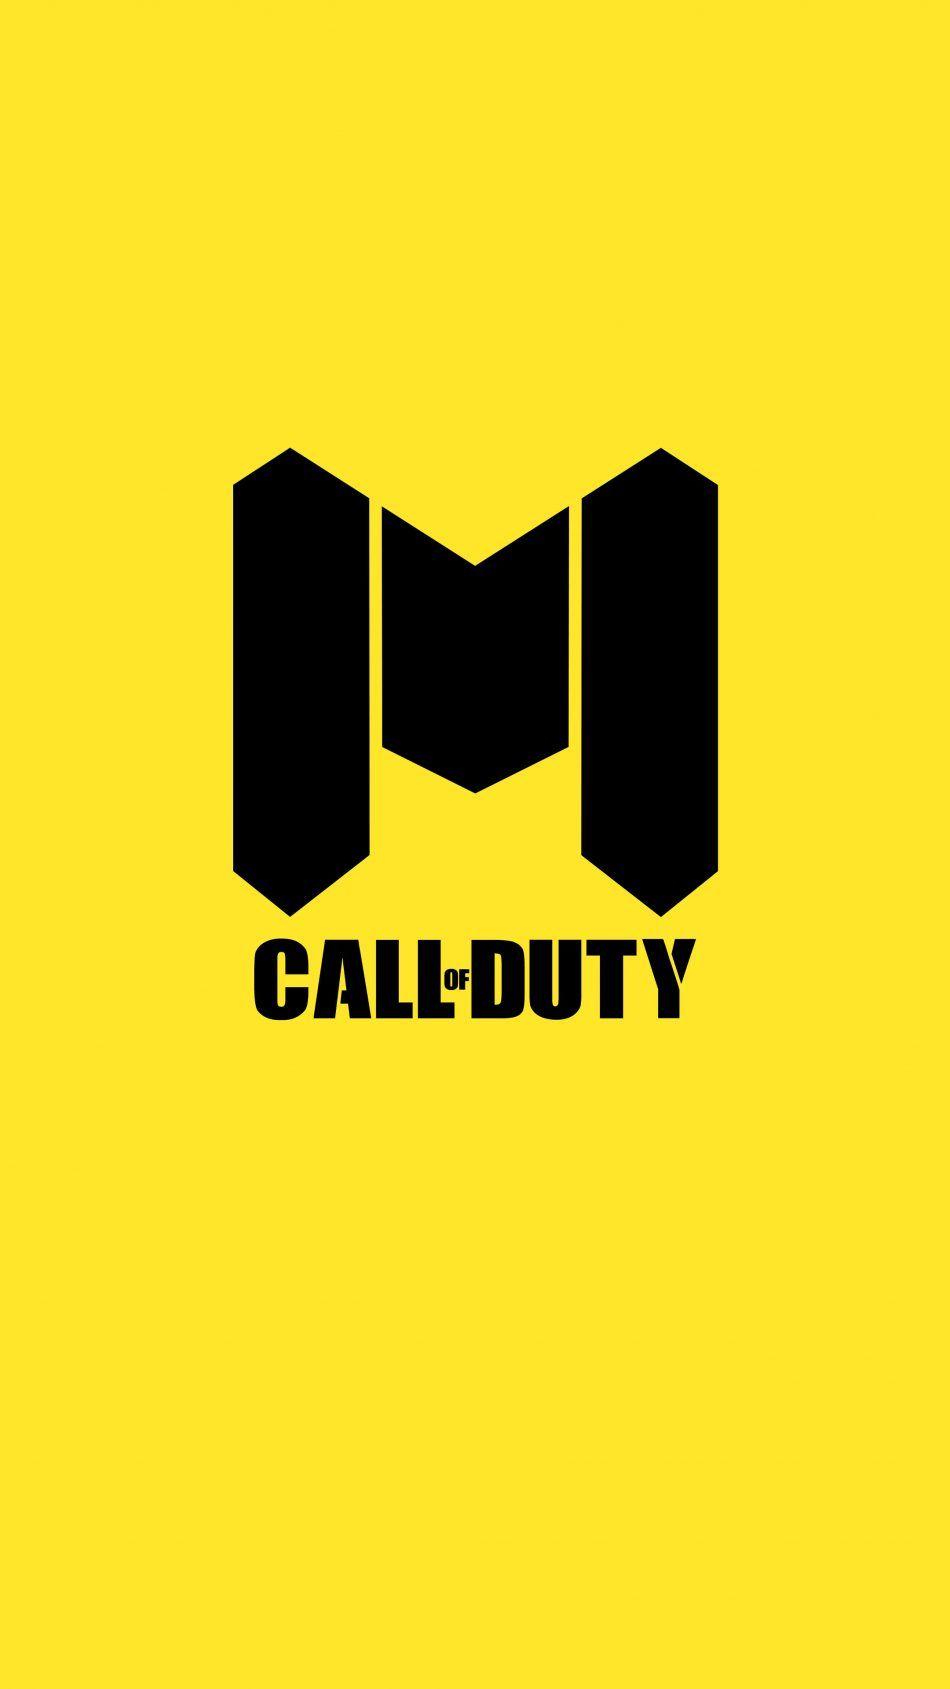 Call of Duty Mobile Logo Yellow Background 4K Ultra HD Mobile Wallpaper. Call of duty, Mobile logo, Call off duty